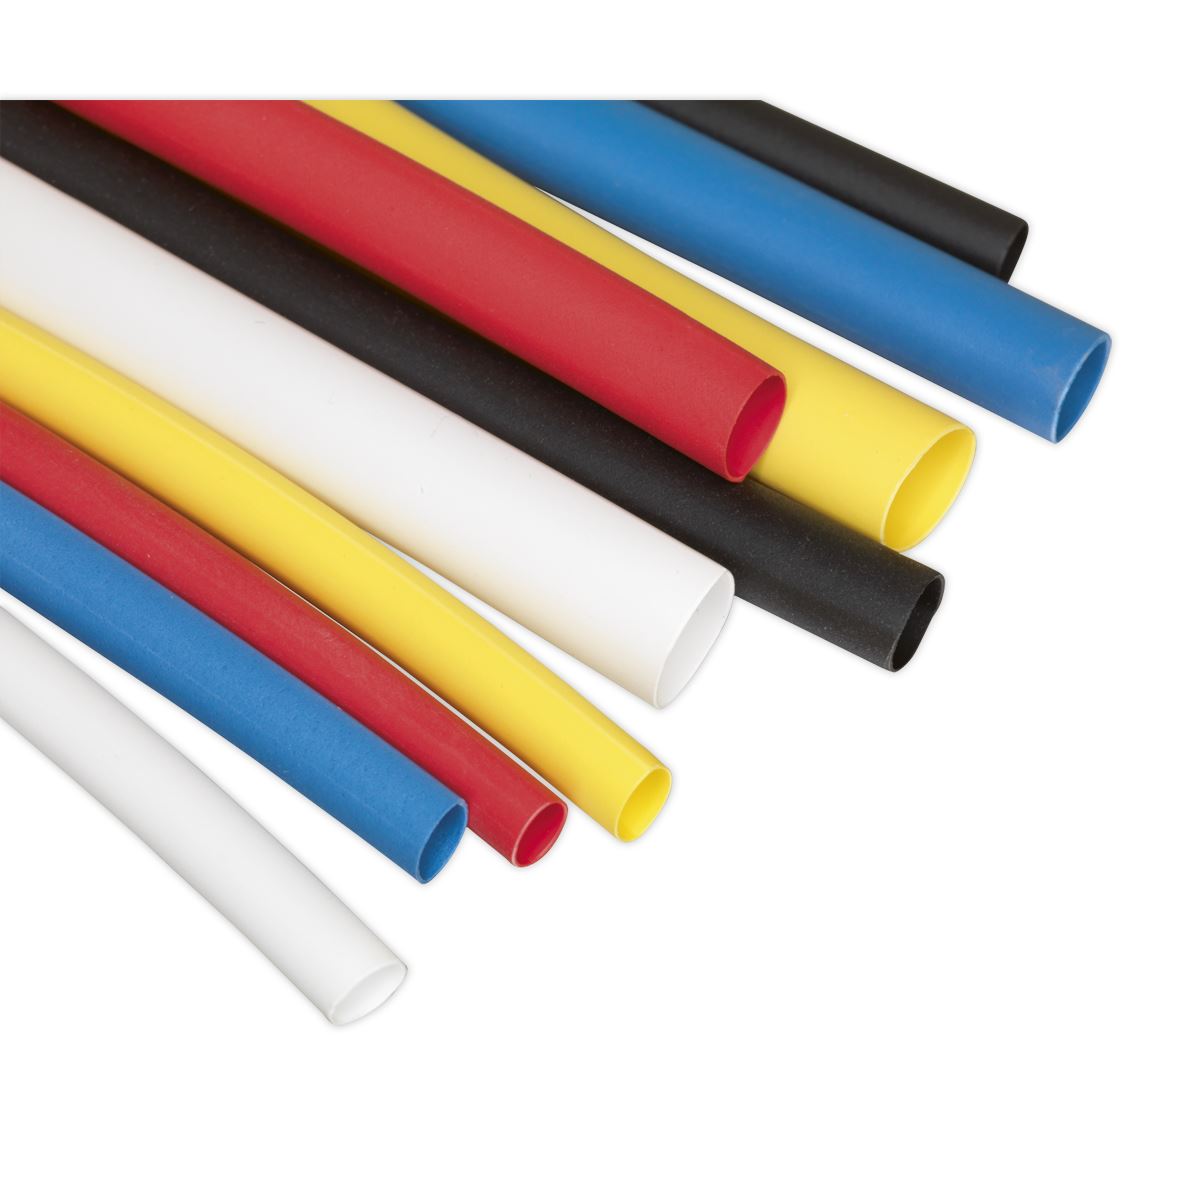 Sealey Heat Shrink Tubing Assortment 180pc 50 & 100mm Mixed Colours